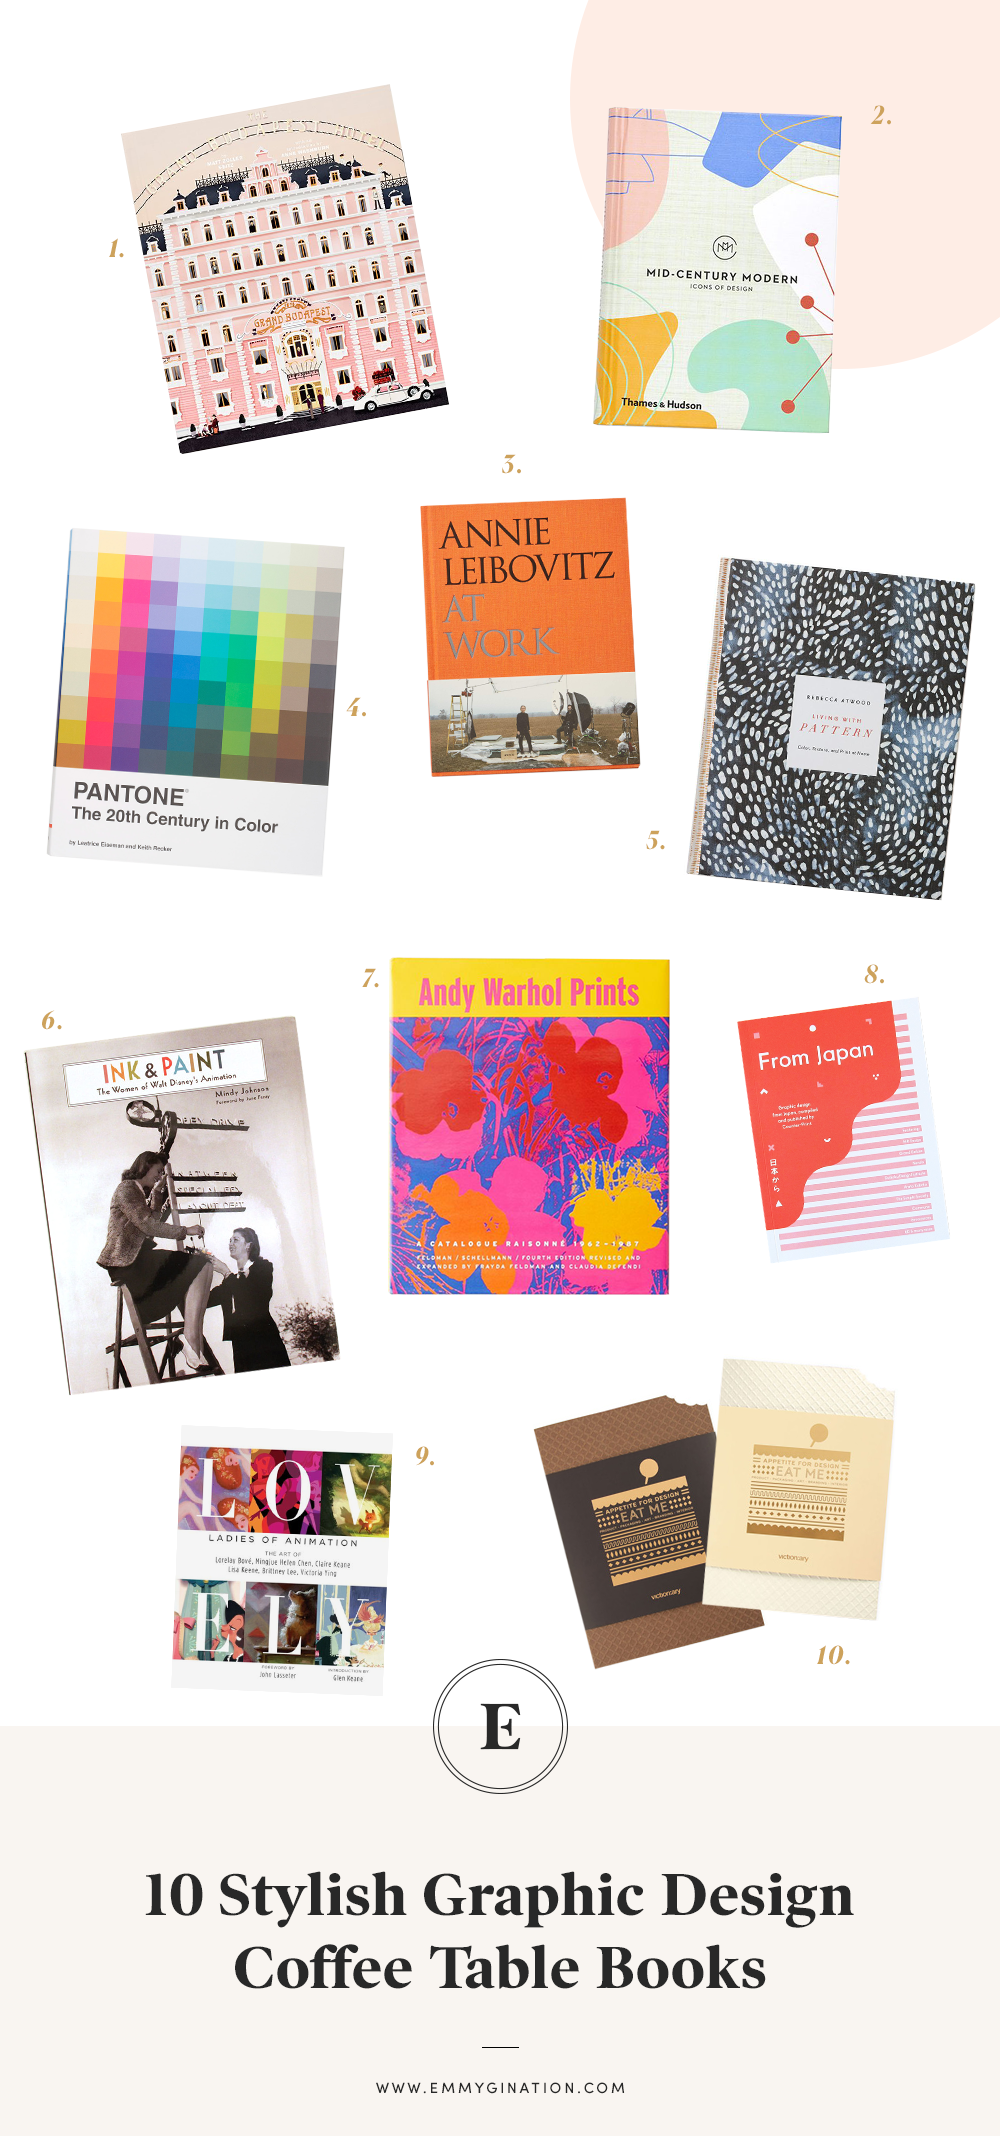 5 Coffee Table Books for Design and Architecture Geeks Everywhere